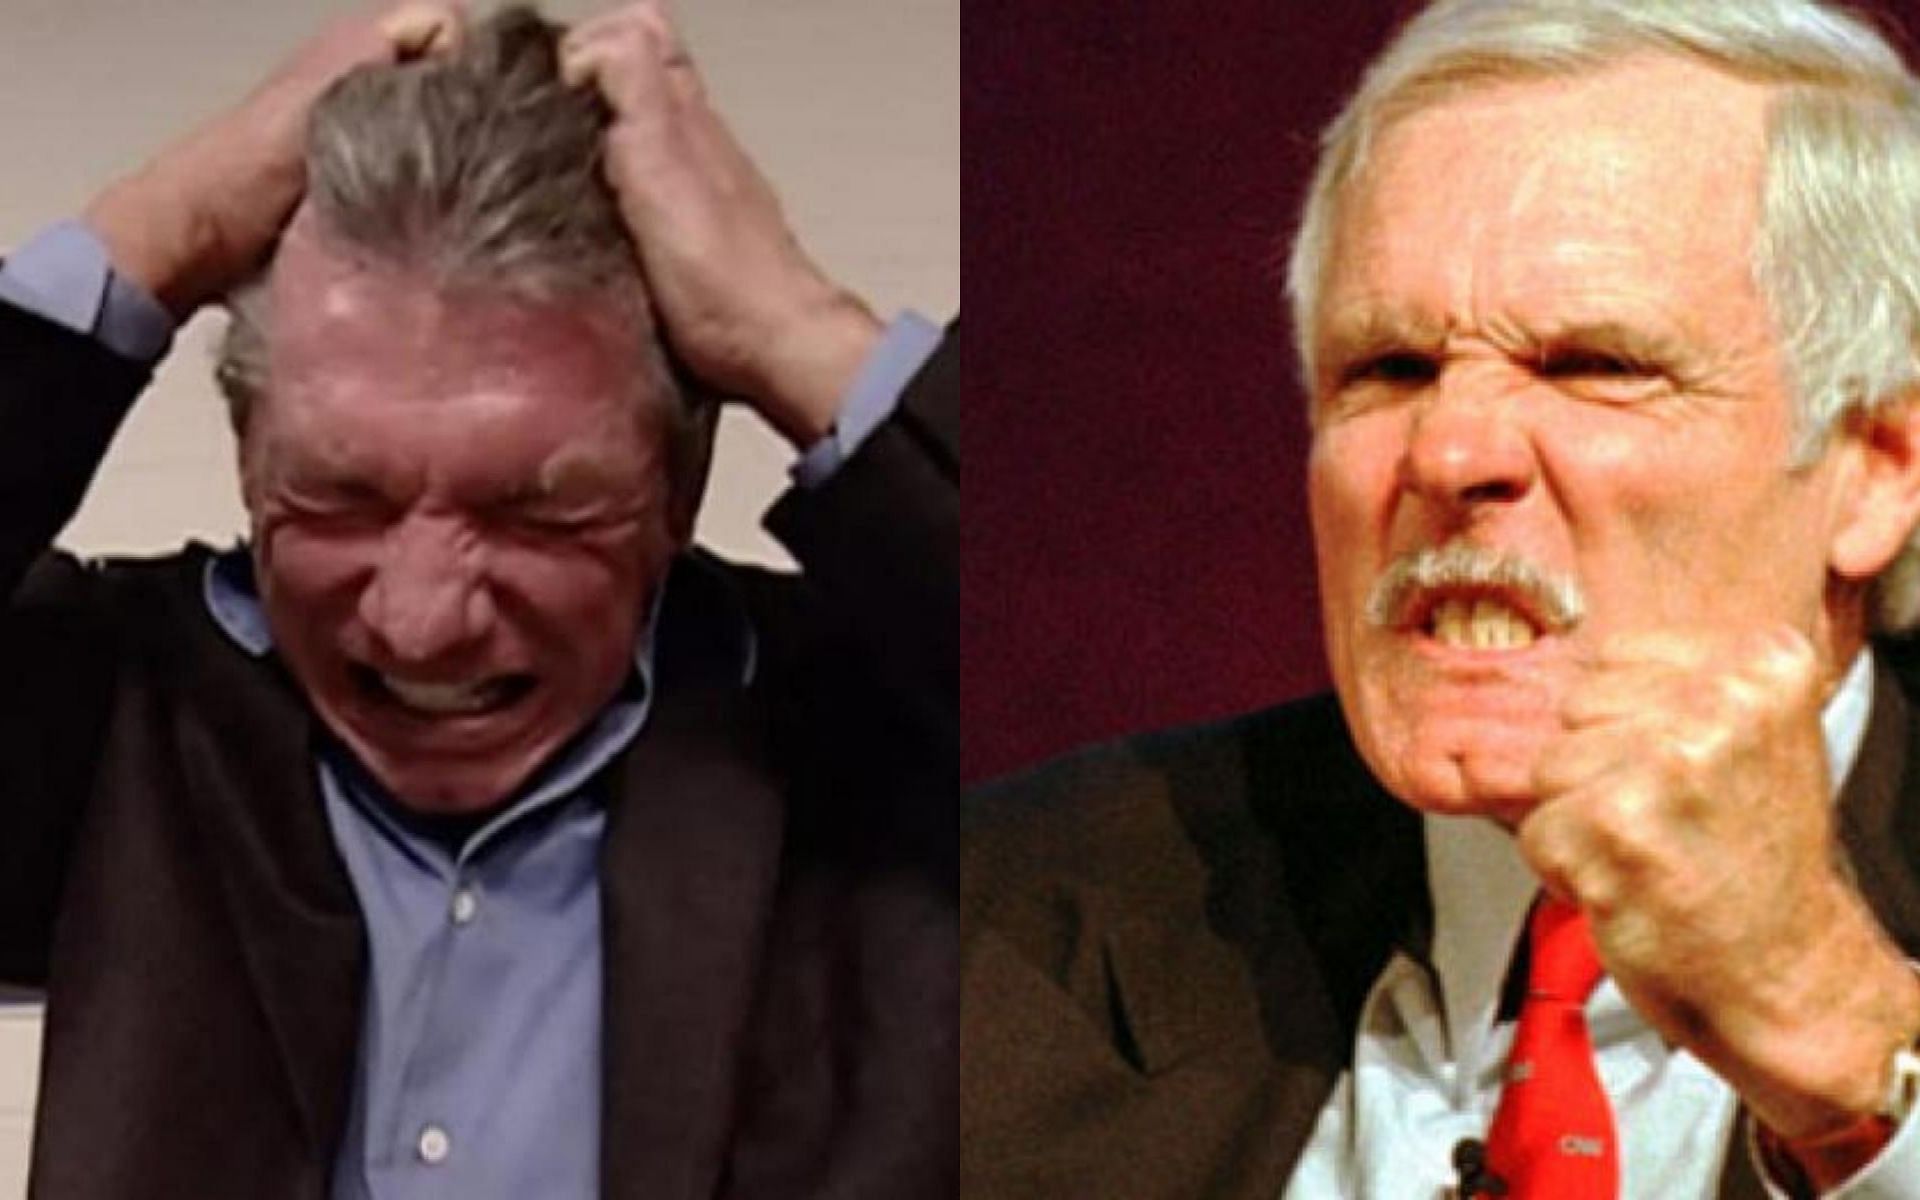 Vince McMahon and Ted Turner were rivals with WWE and WCW competing in the Monday Night Wars